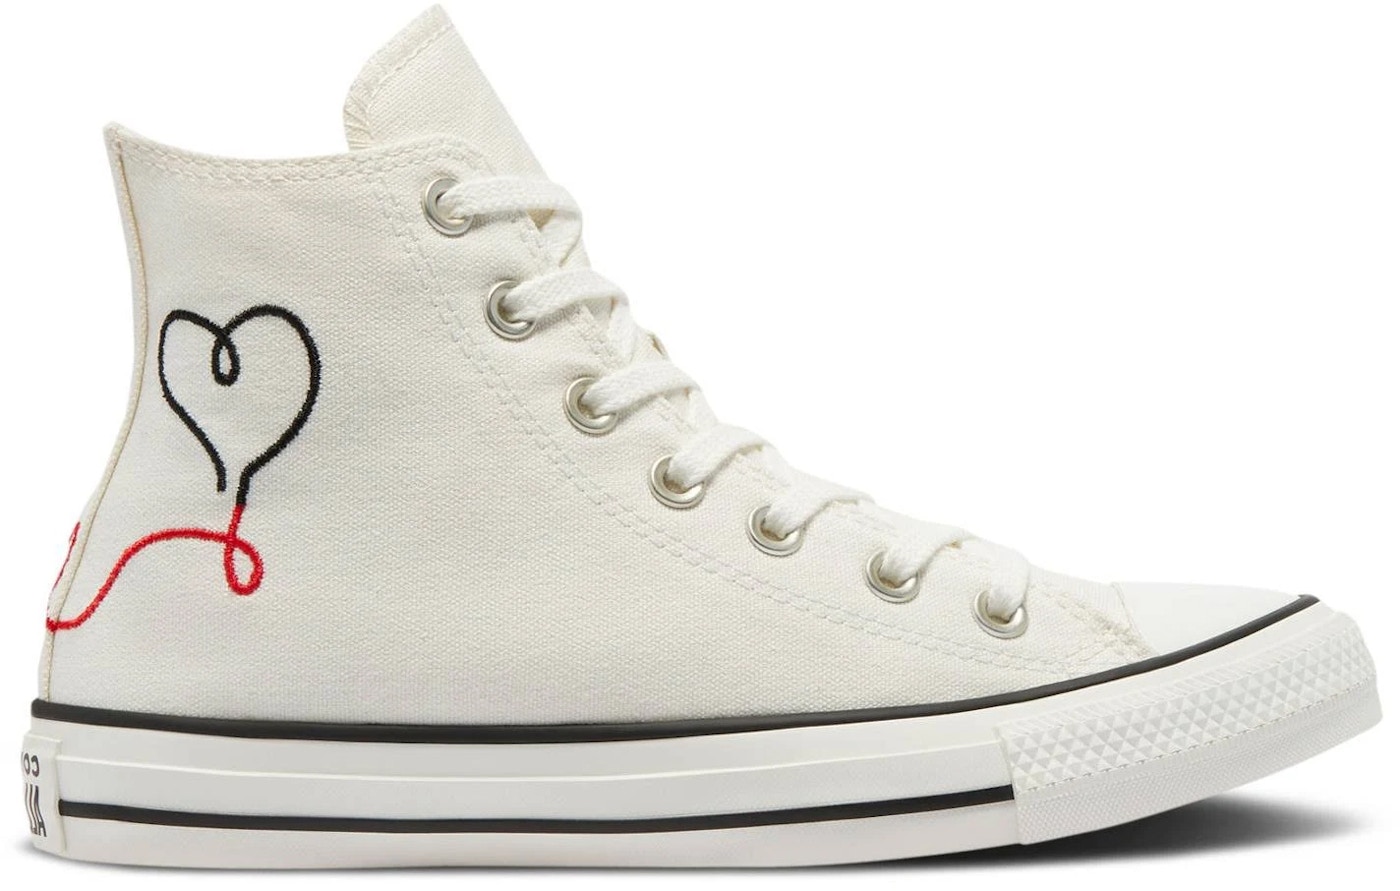 Converse Chuck Taylor Hi with White 171159F